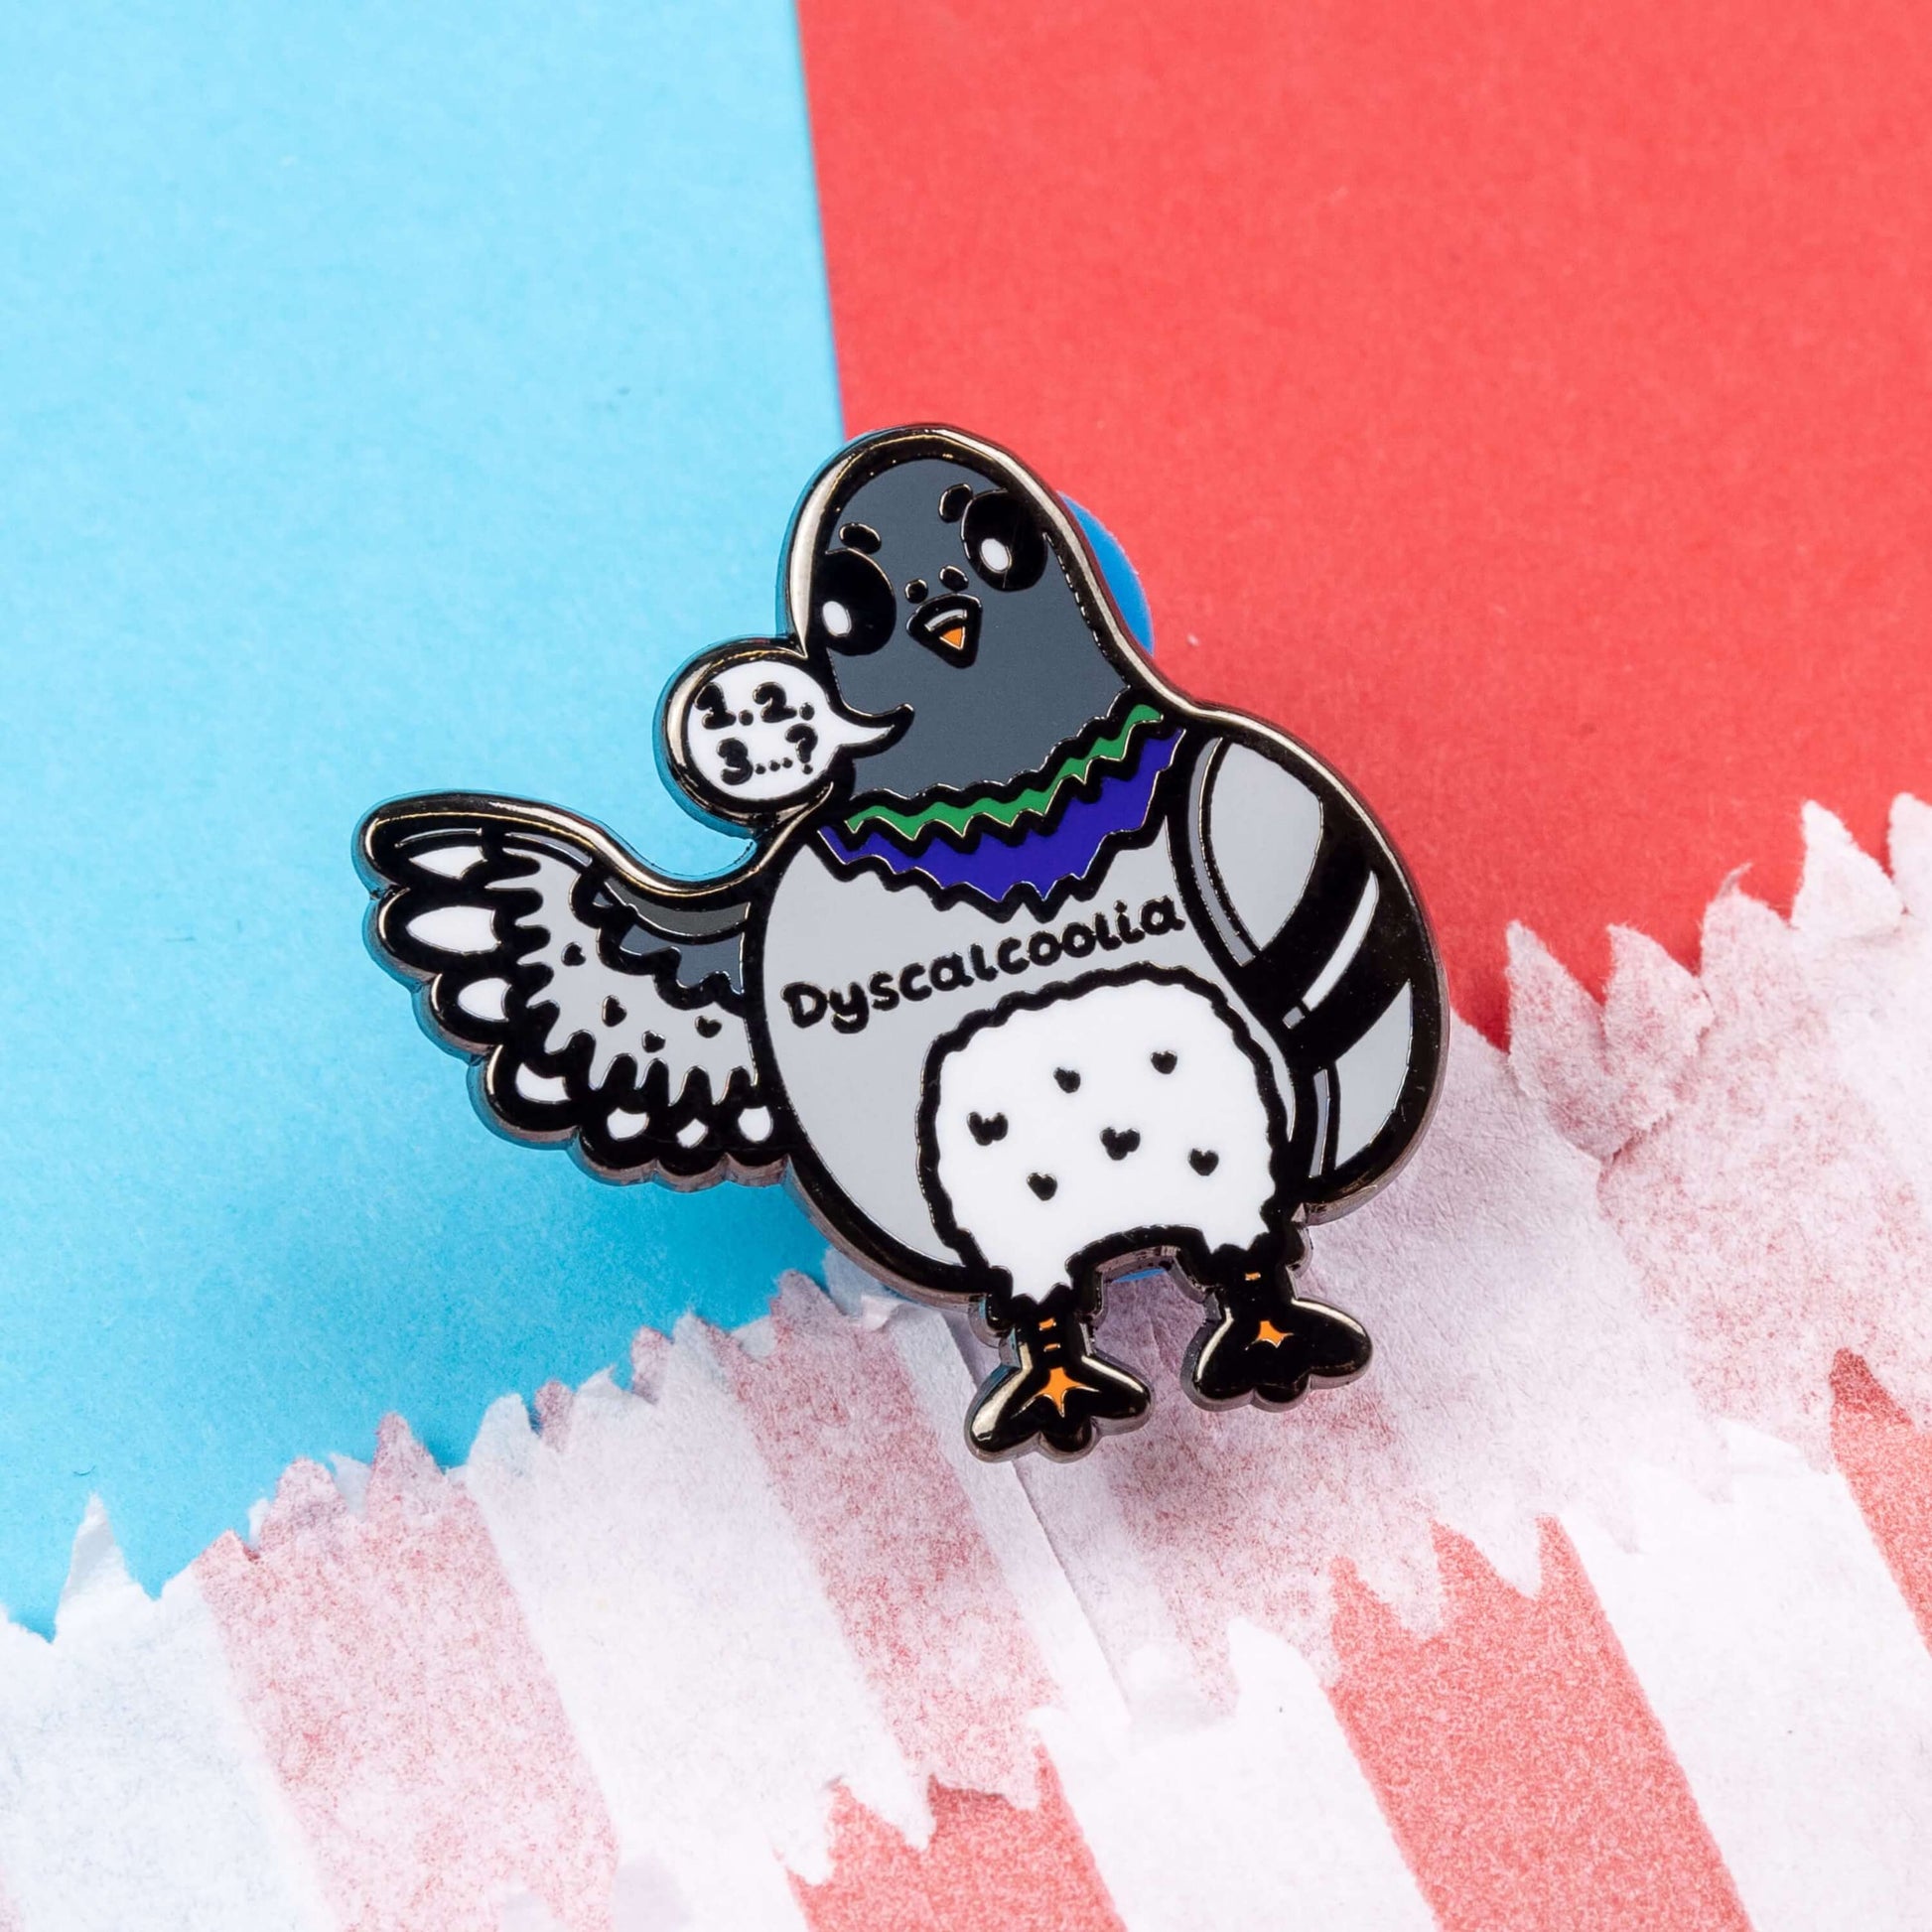 The Dyscalcoolia Pigeon Enamel Pin - Dyscalculia on a red and blue background. A Pigeon looking confused holding up a wing with a speech bubble full of numbers and a question mark across its chest reads 'dyscalcoolia'. The enamel pin is raising awareness for dyscalculia.